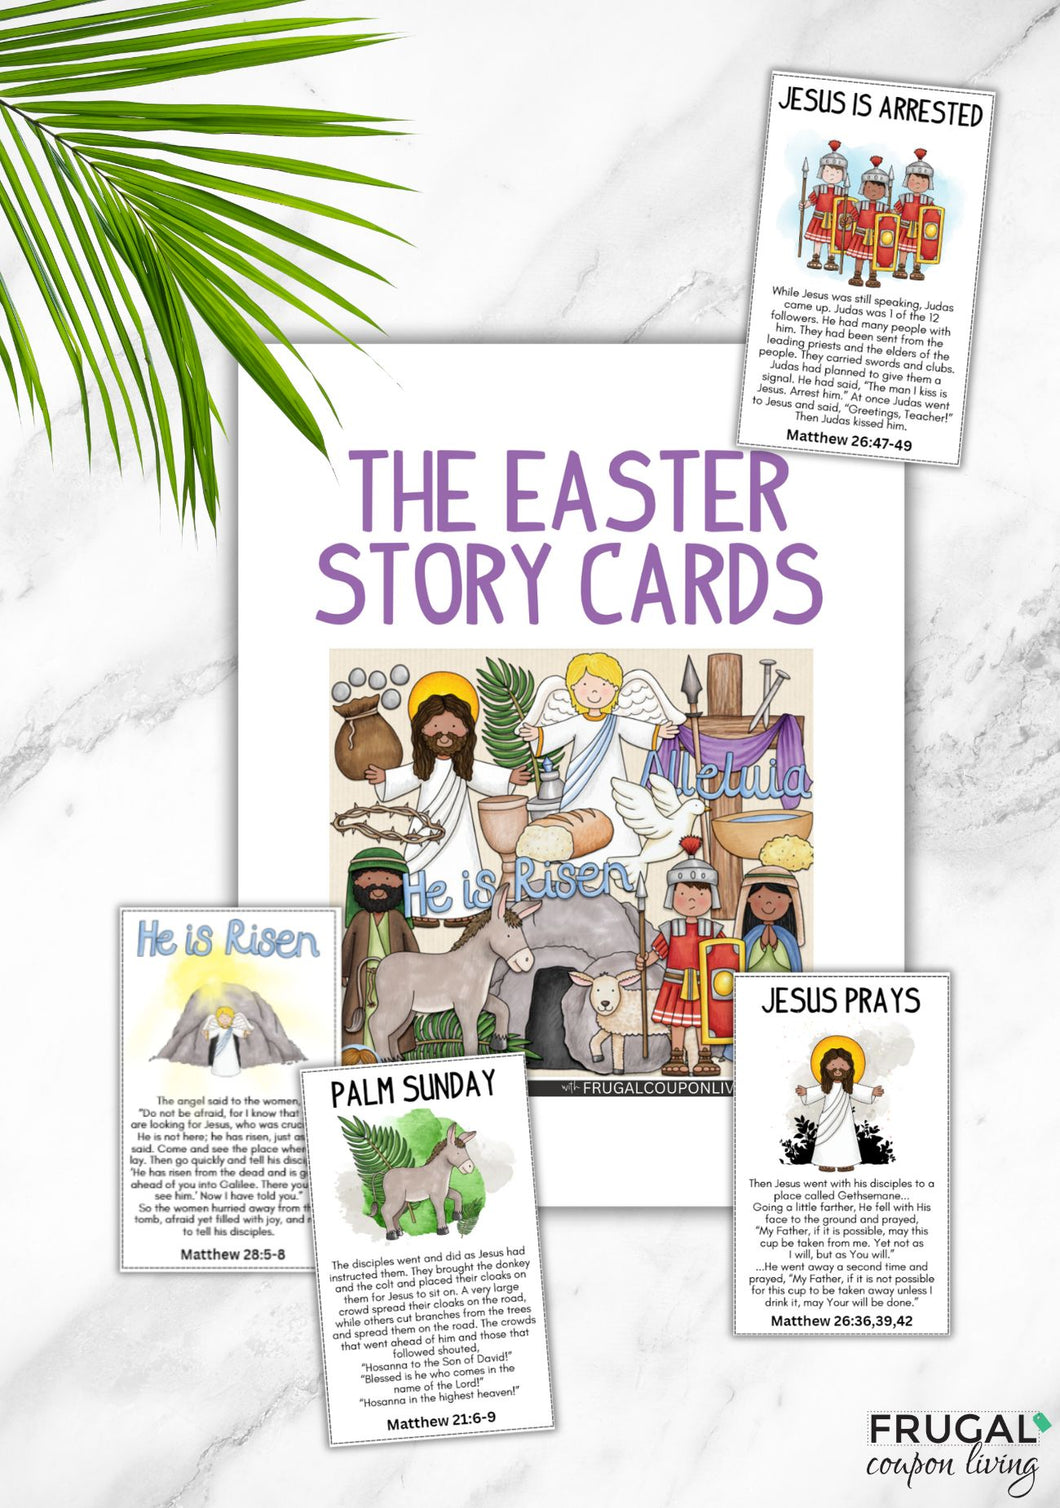 The Easter Story Cards